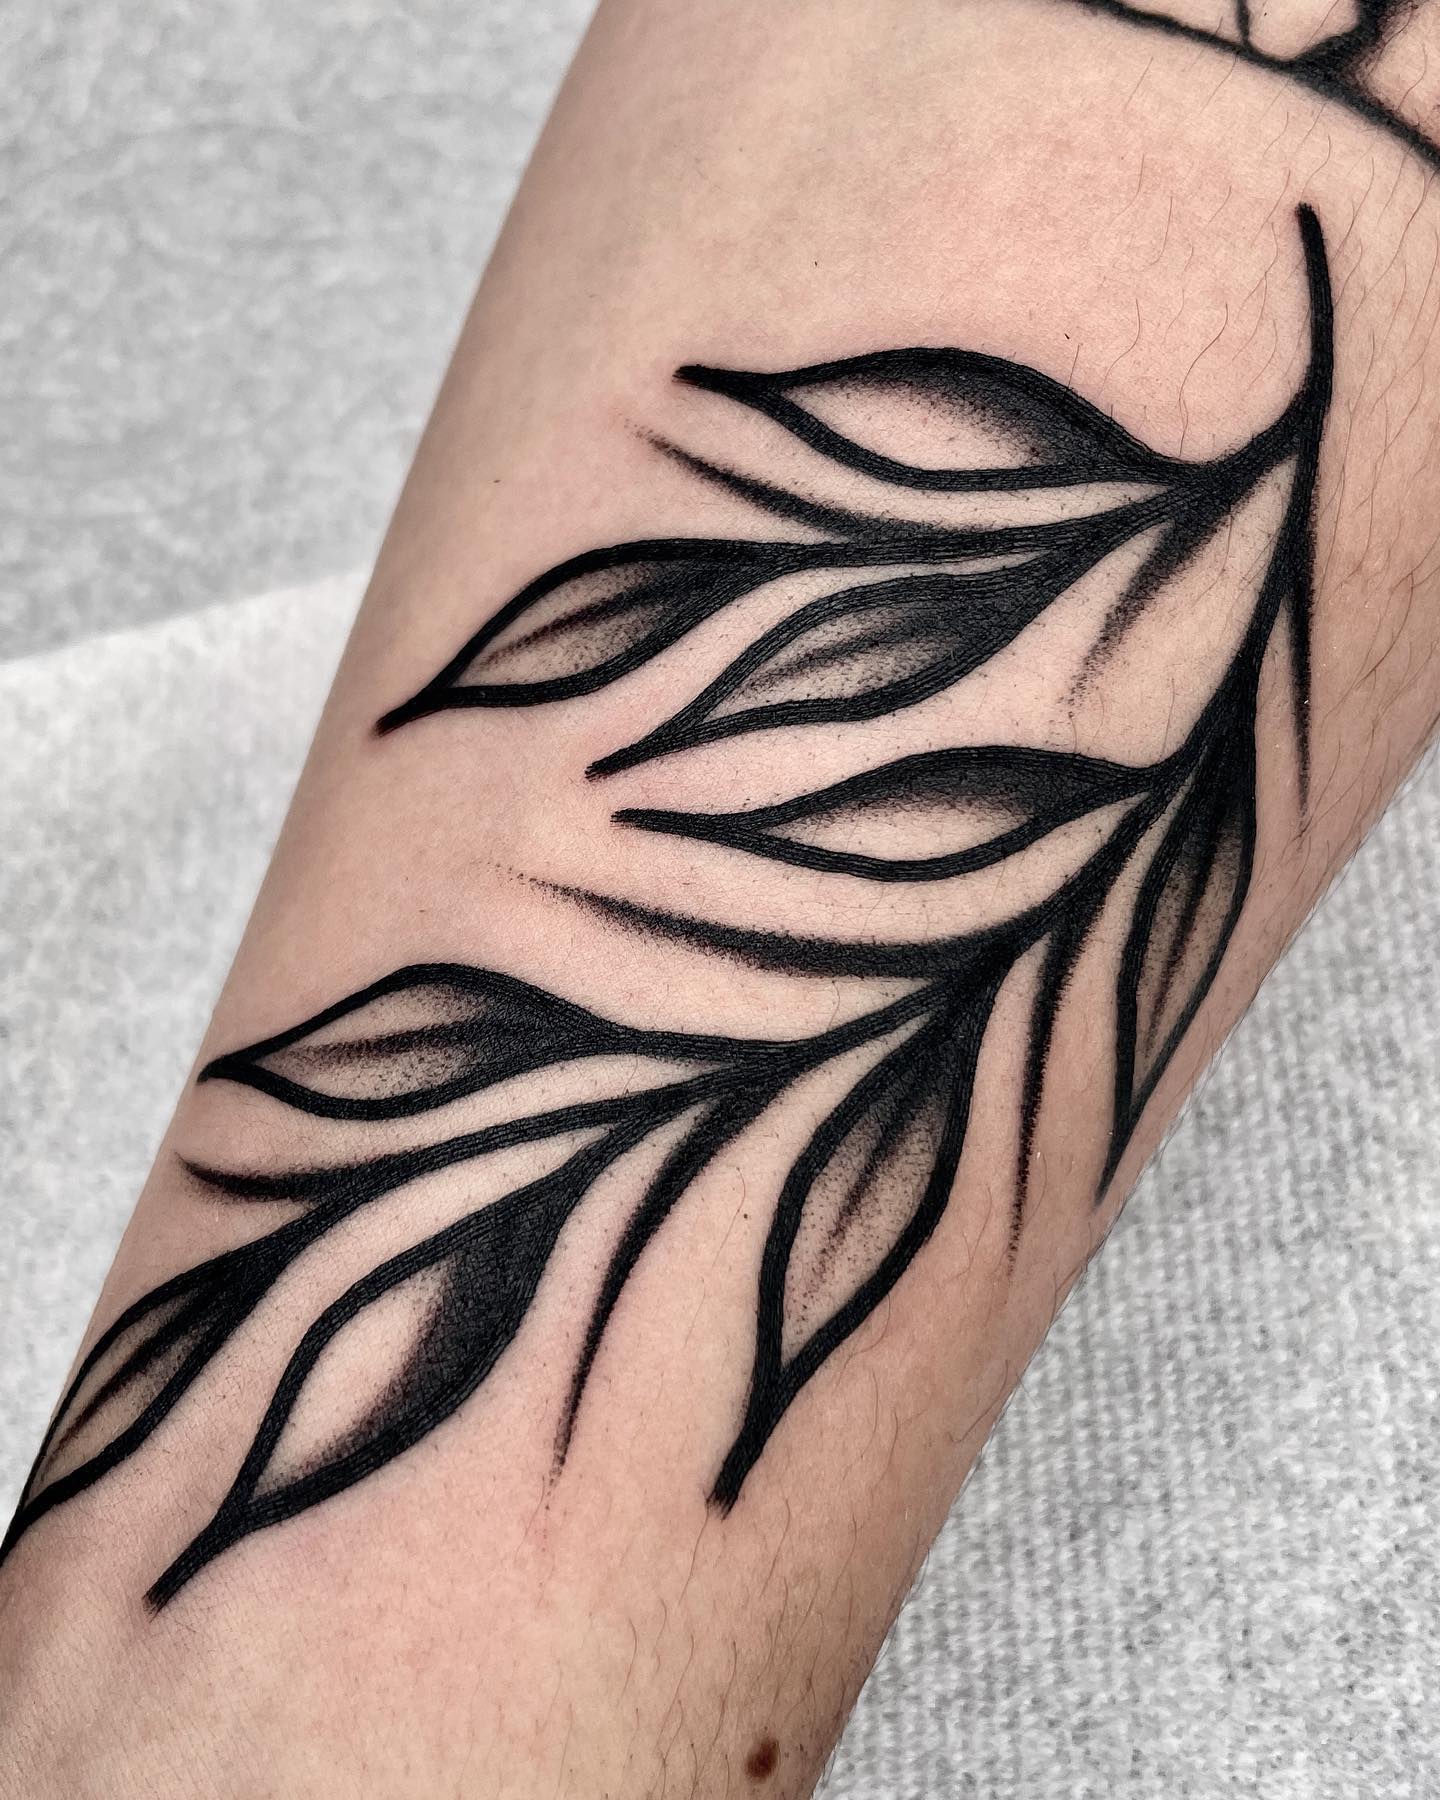 It's one of the coolest leaves tattoos to try. Although it is a freehand tattoo, all the lines and shapes look perfect. Give it a shot.